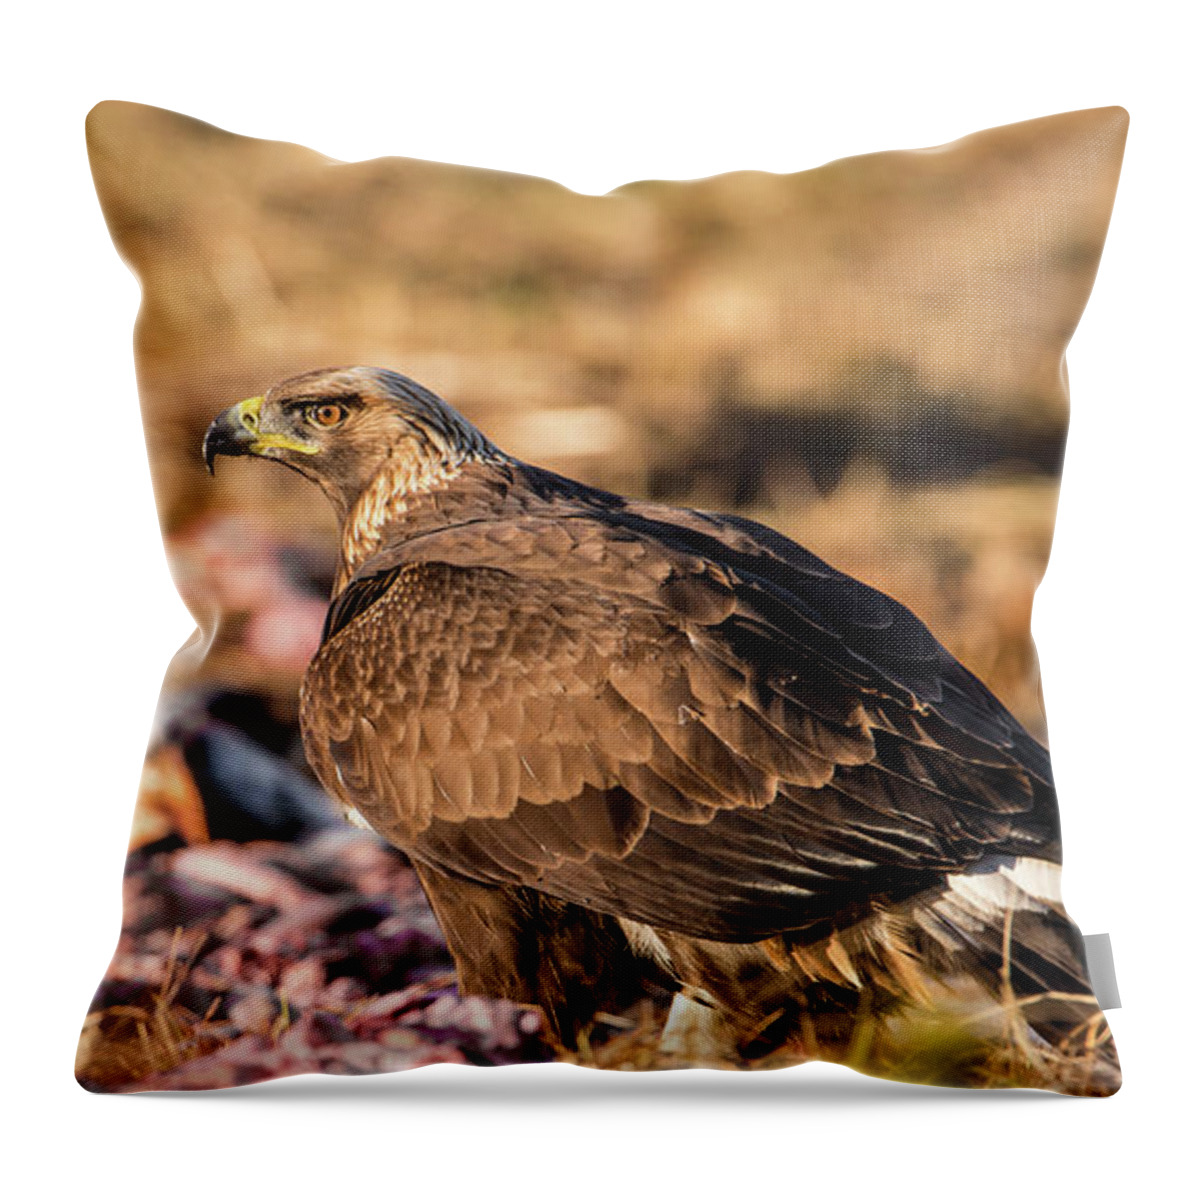 Golden Eagle Throw Pillow featuring the photograph Golden Eagle's Back by Torbjorn Swenelius